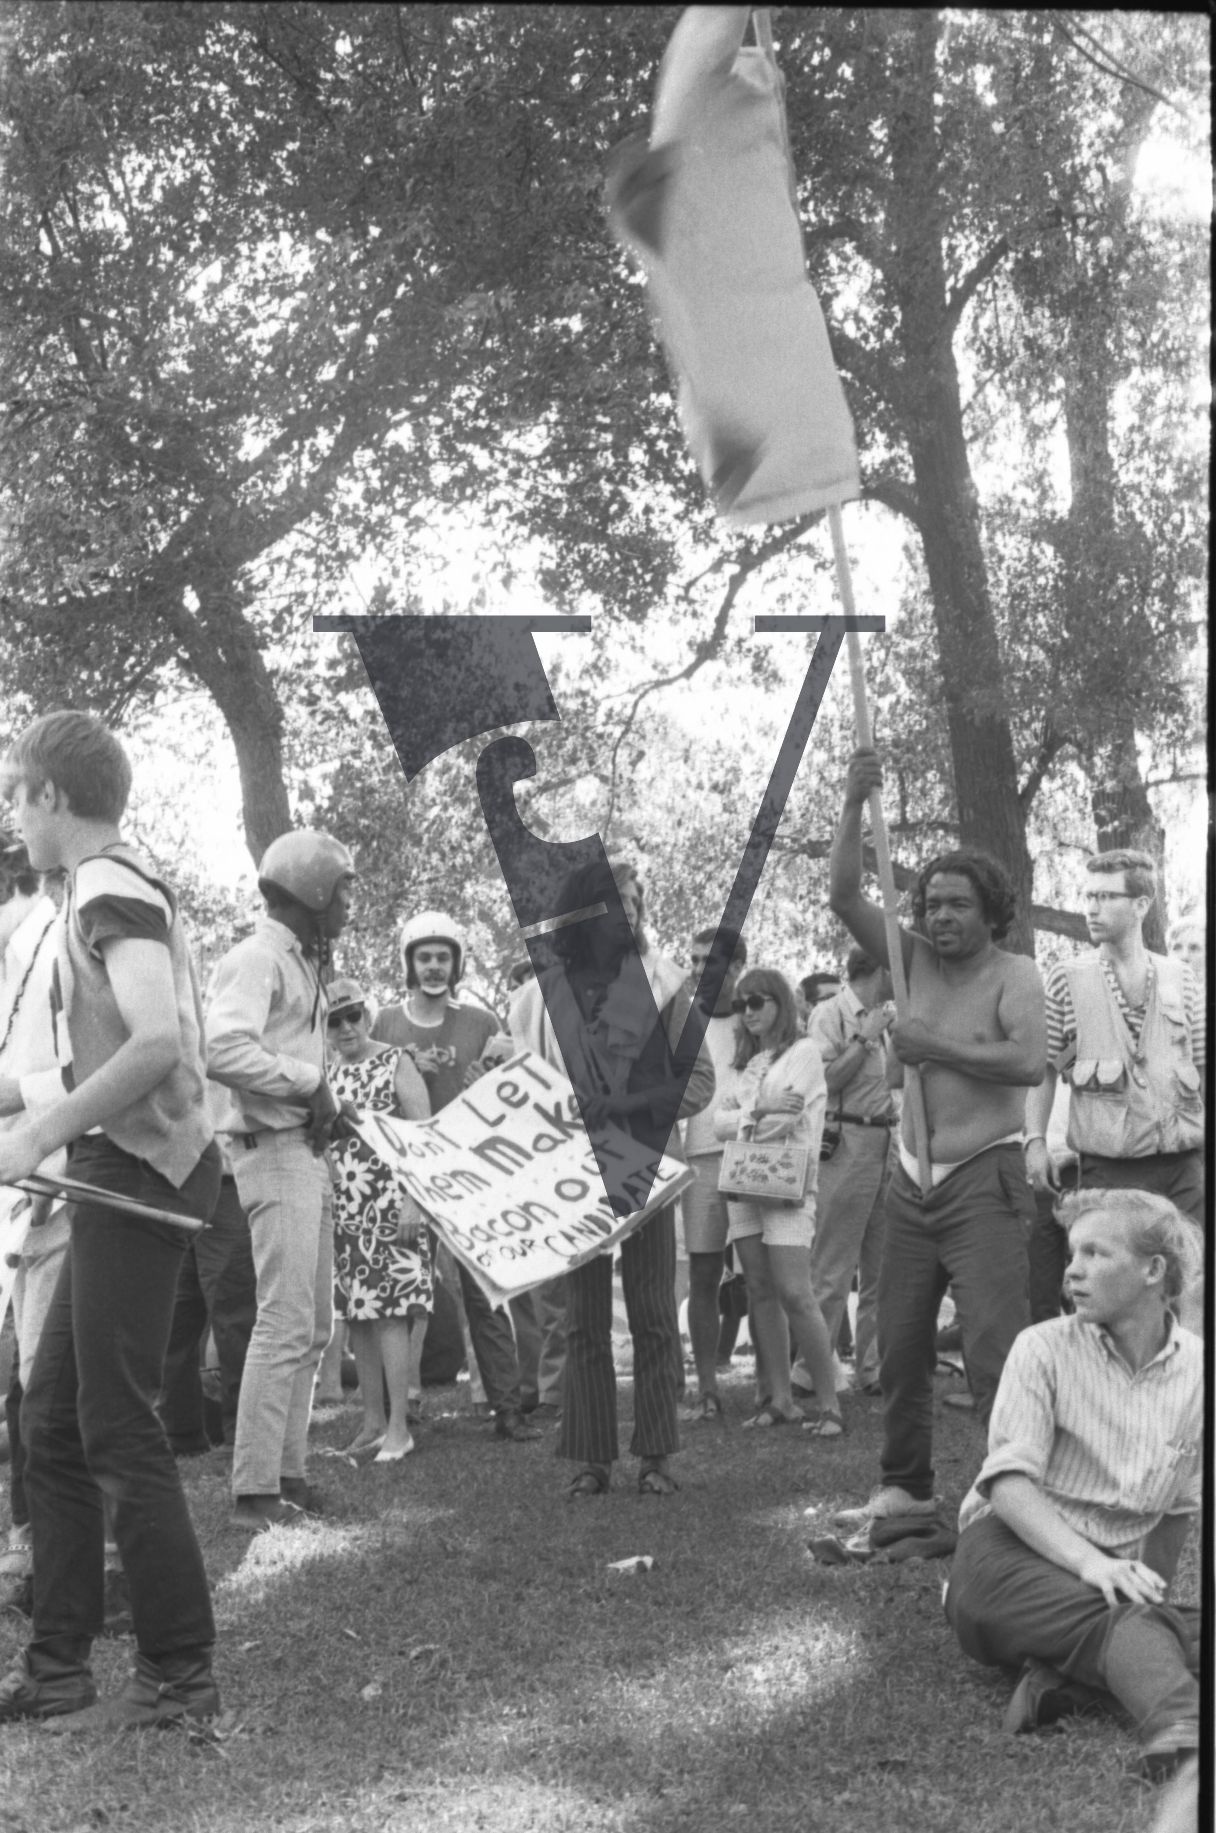 Chicago, Anti-war rallies in Lincoln Park, hippy youth in park, placard reads 'Don't Let Them Make Bacon Out Of Our Candidate'.